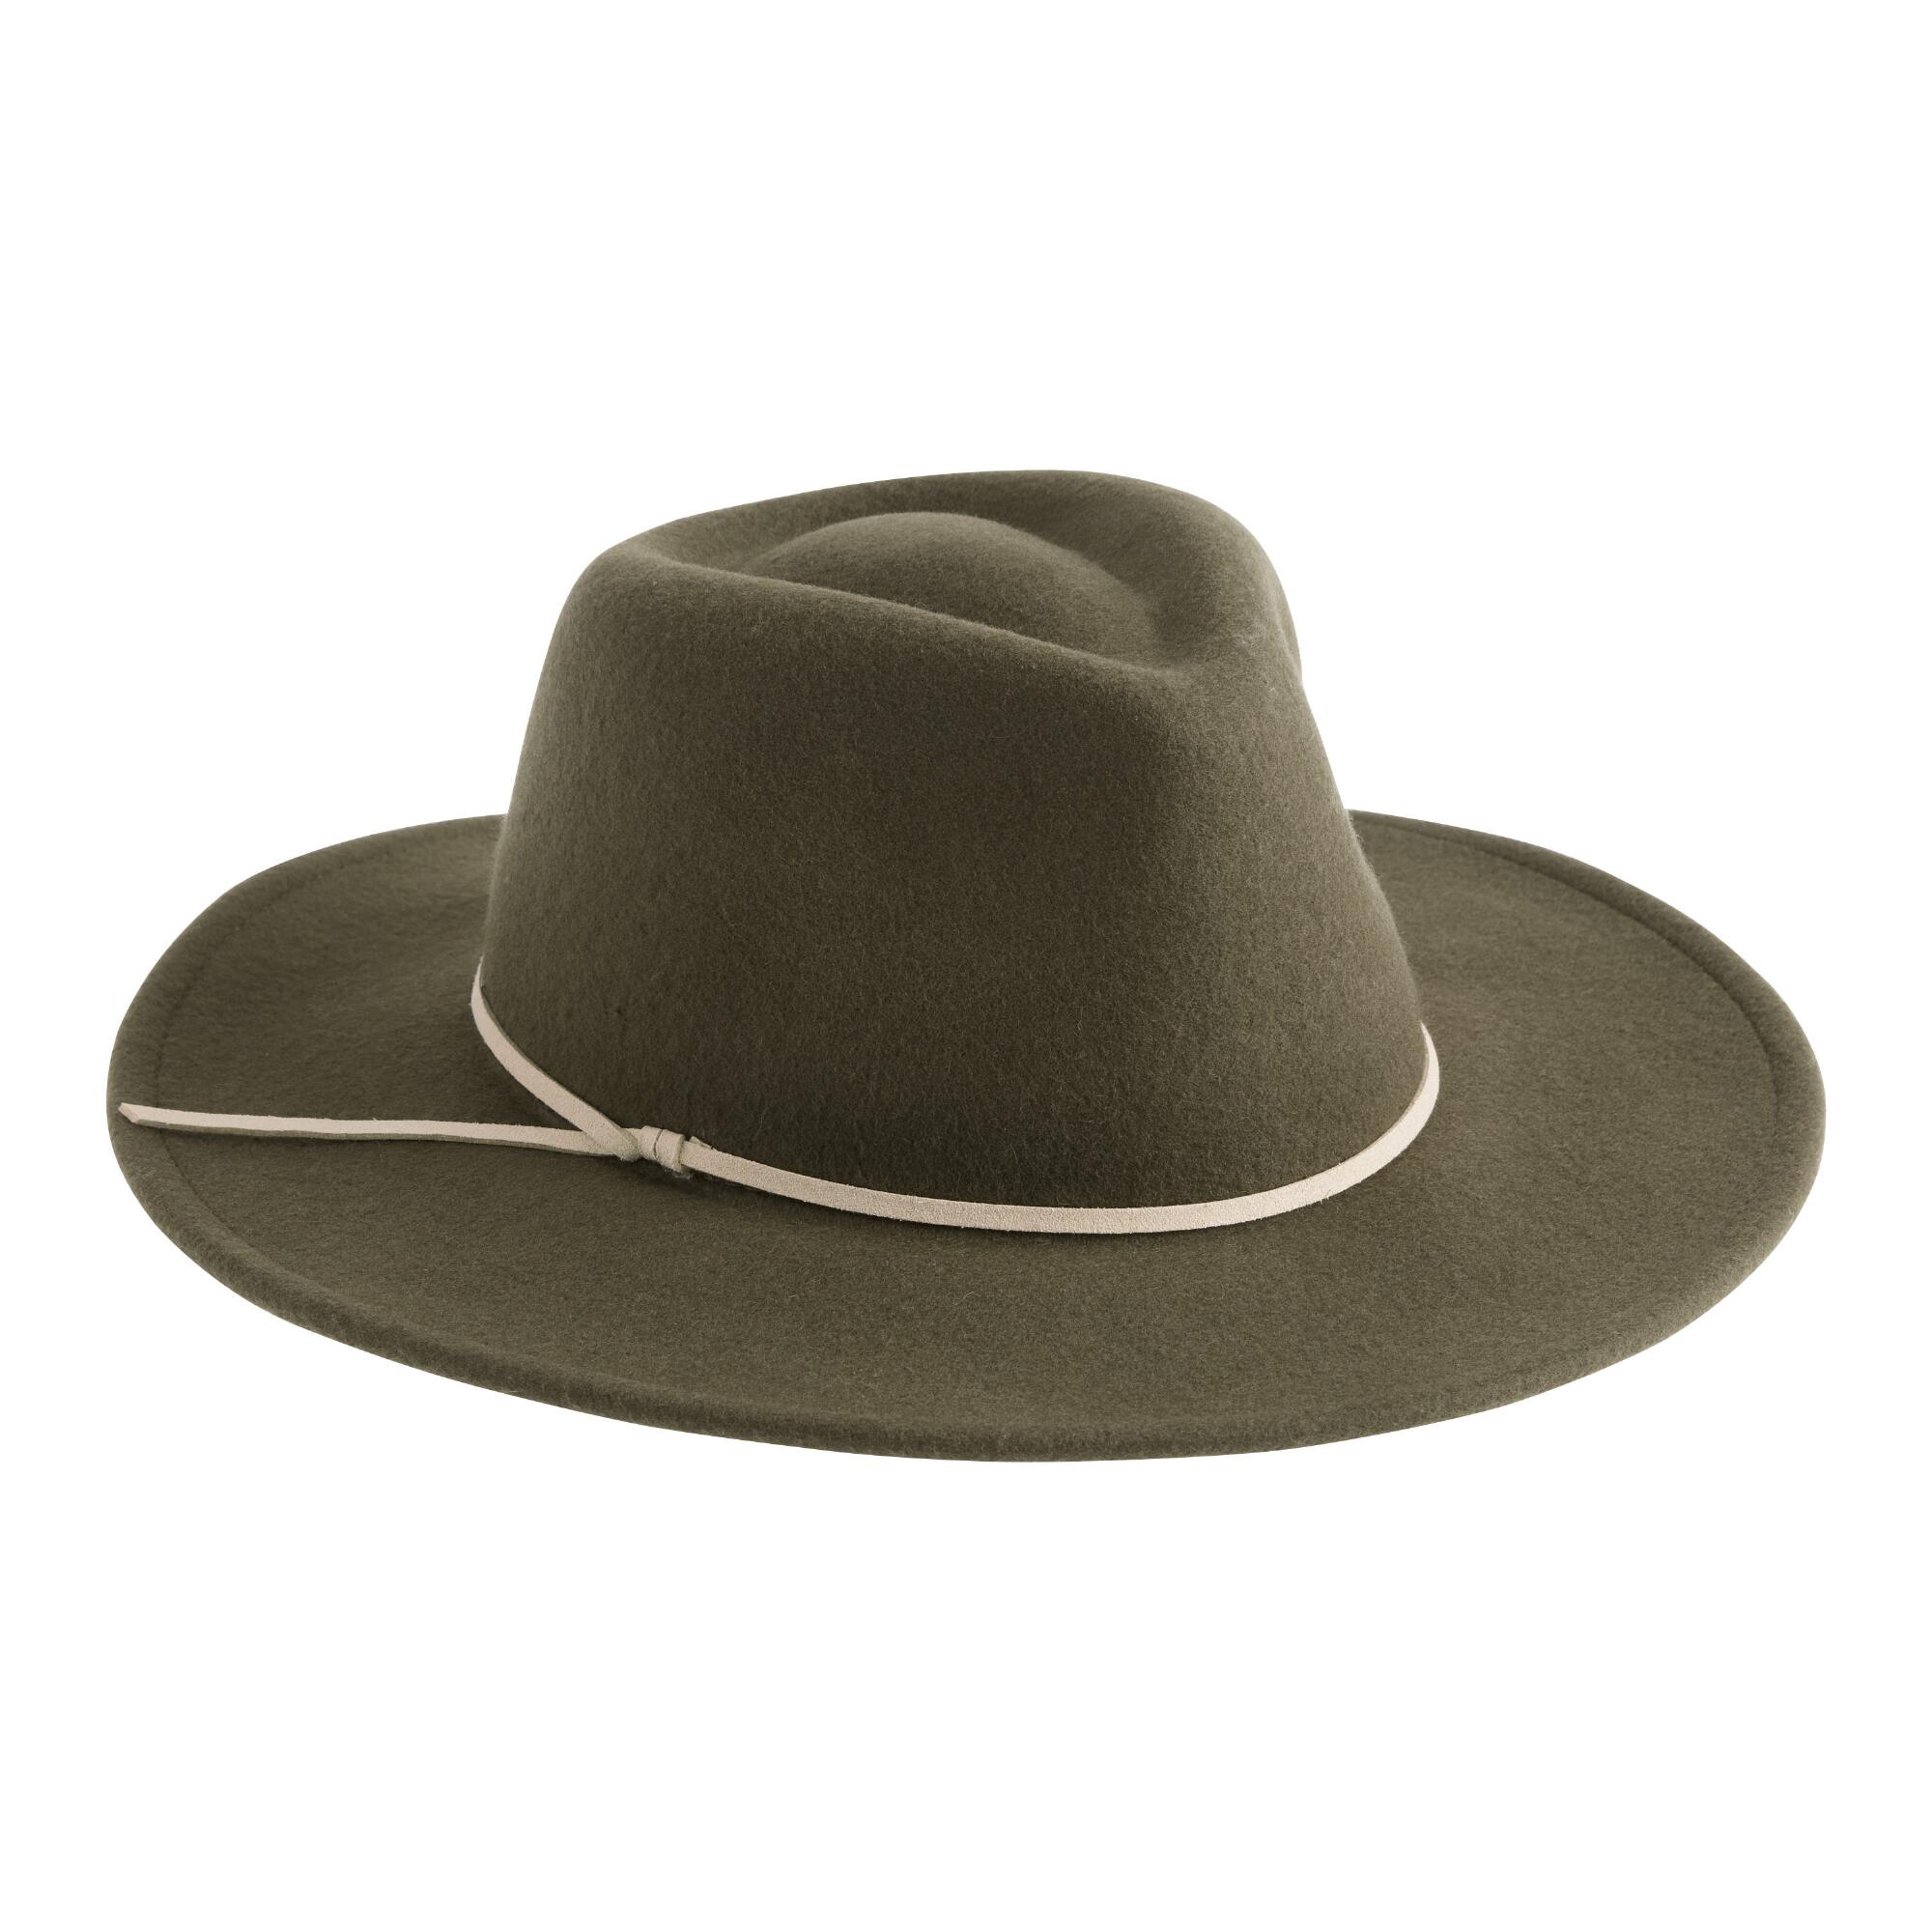 Olive Rancher Hat With Tan Trim: Green - Wool by World Market